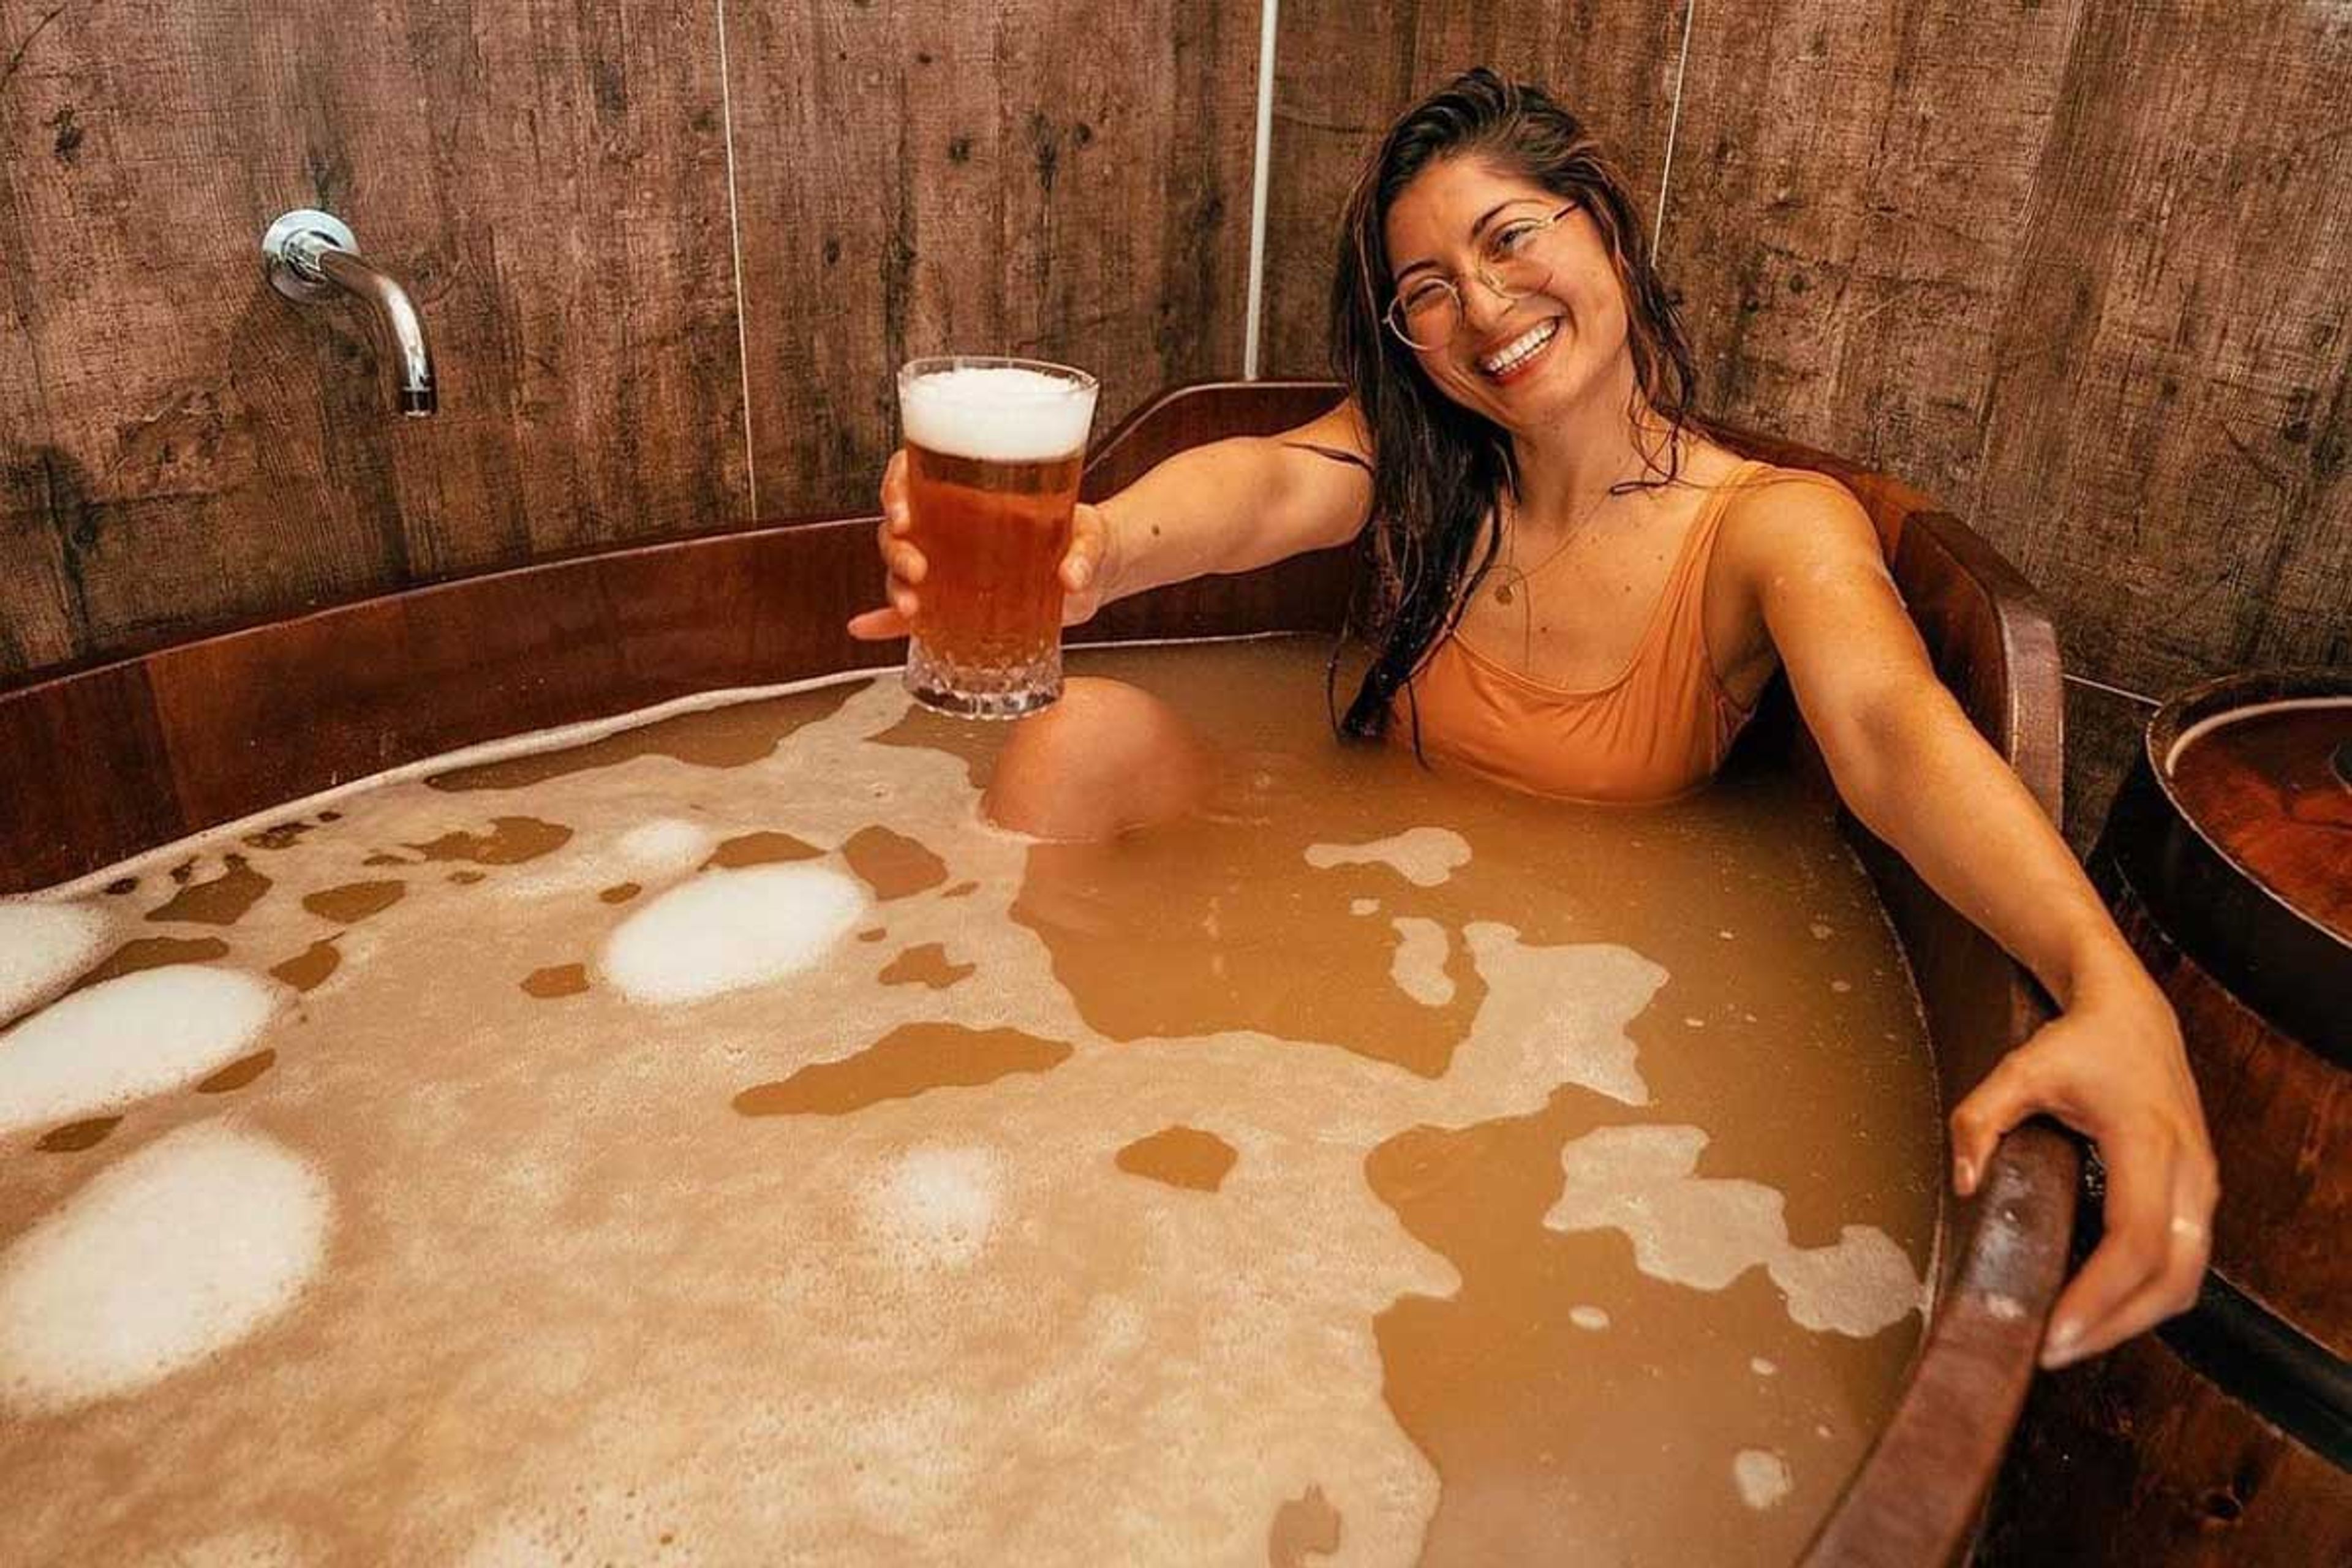 Experience the unique and refreshing Beer bath in Iceland. Enjoy a soothing soak in warm beer-infused water, known for its many benefits for the skin and body. Surrounded by Iceland's breathtaking landscape, the Beer bath is a must-try for anyone looking to unwind and rejuvenate in a fun and unconventional way.